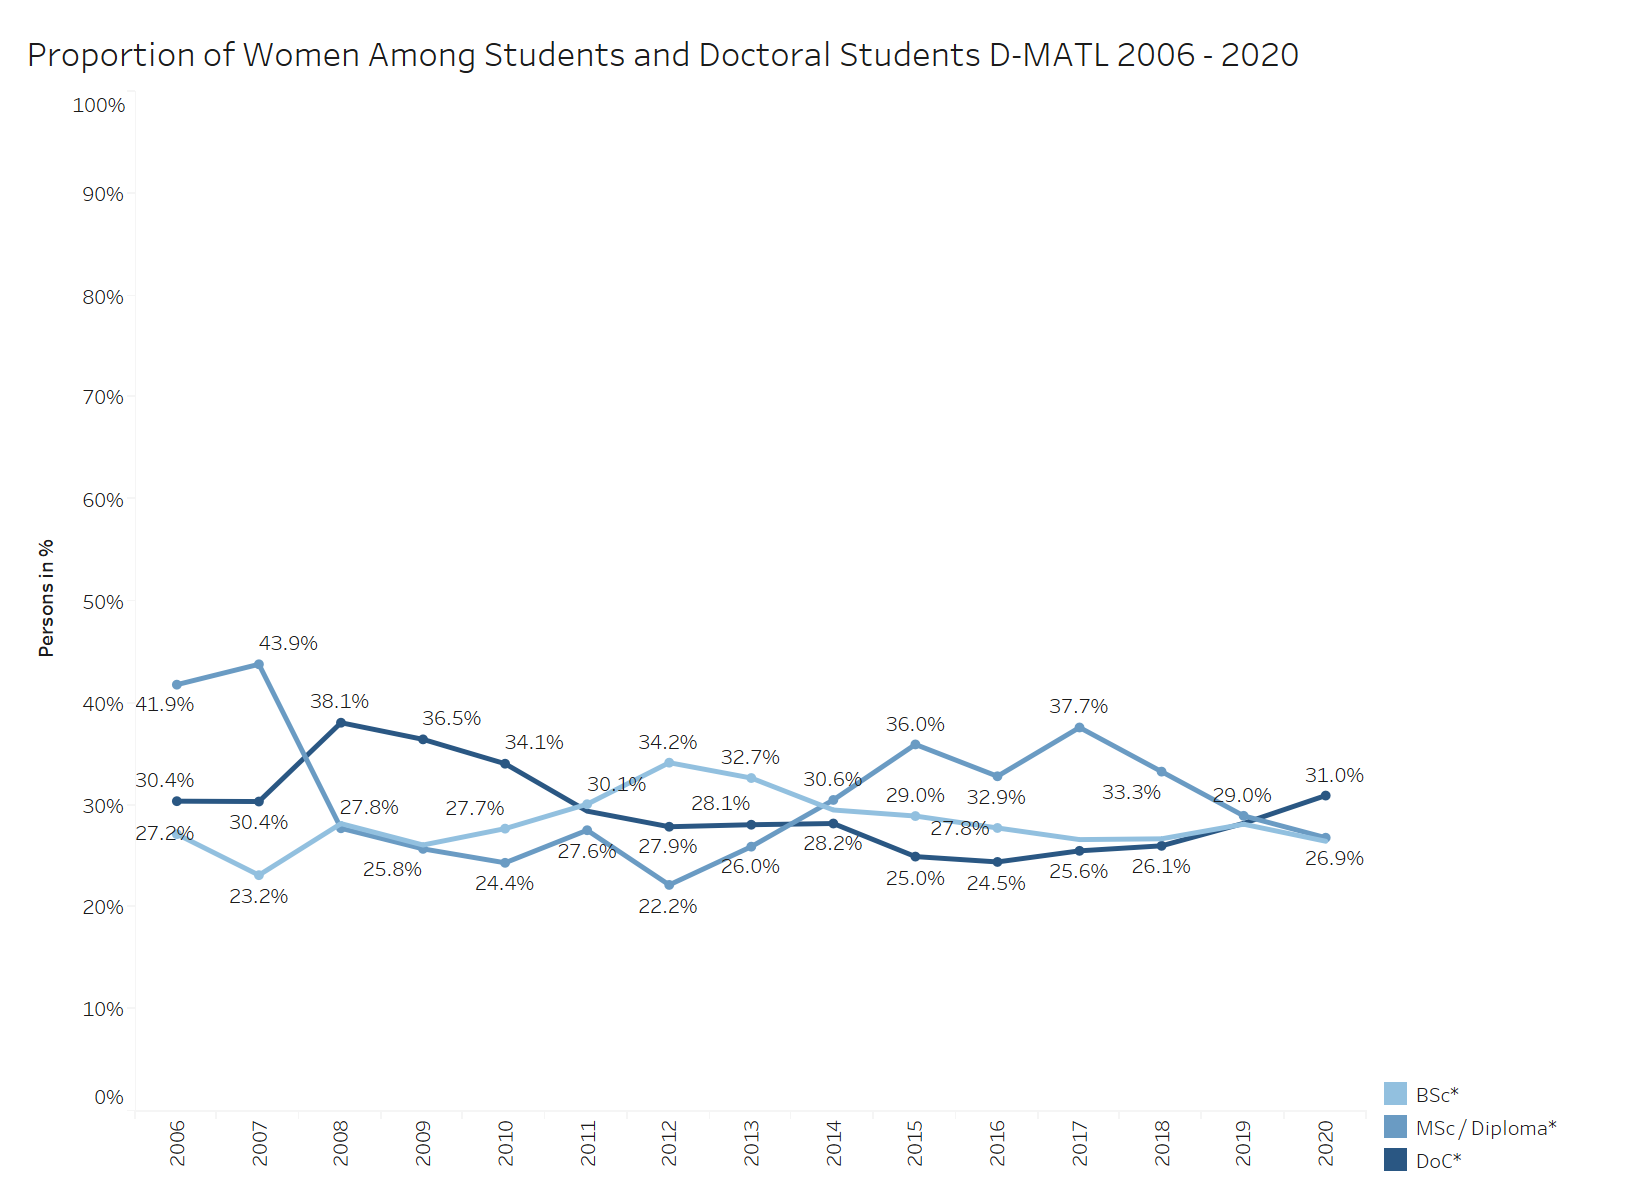 Proportion of Women Among Students and Doctoral Students D-MATL 2006 - 2020